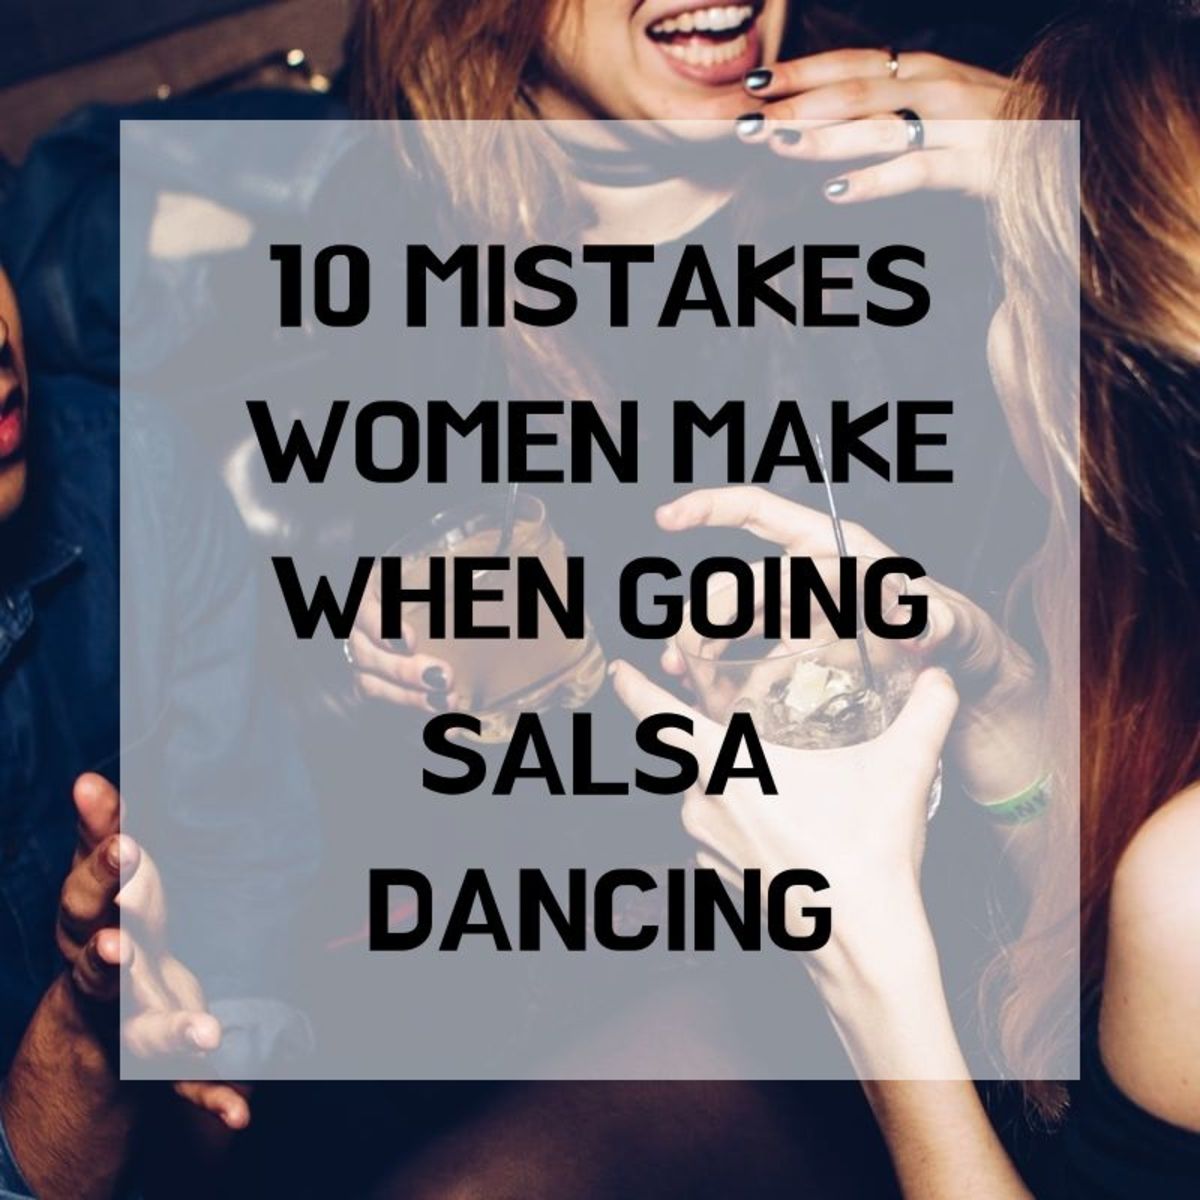 Going out salsa dancing can be a lot of fun! Follow this ten tips to make the most of your evening.